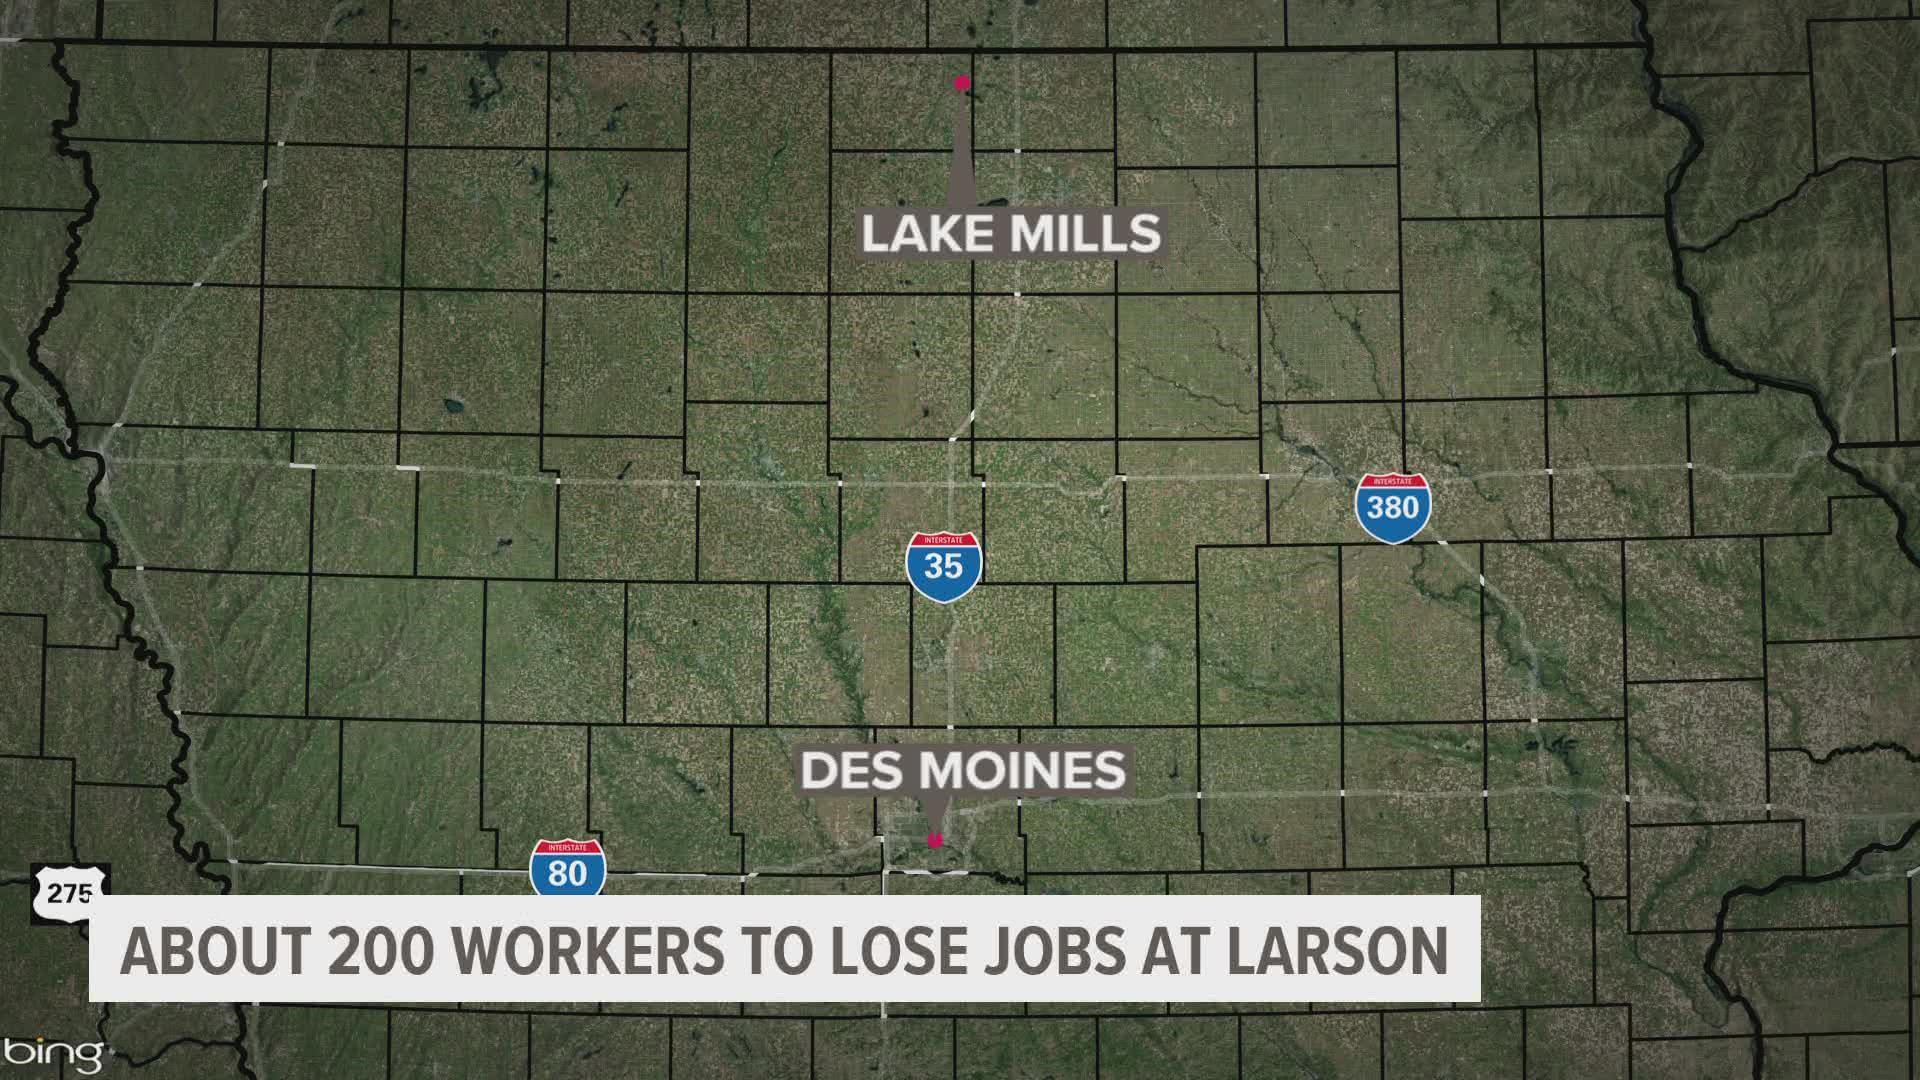 Larson, which builds doors and windows, told Local 5 the company is committed to helping its displaced workers, including severance packages and 60 days paid.